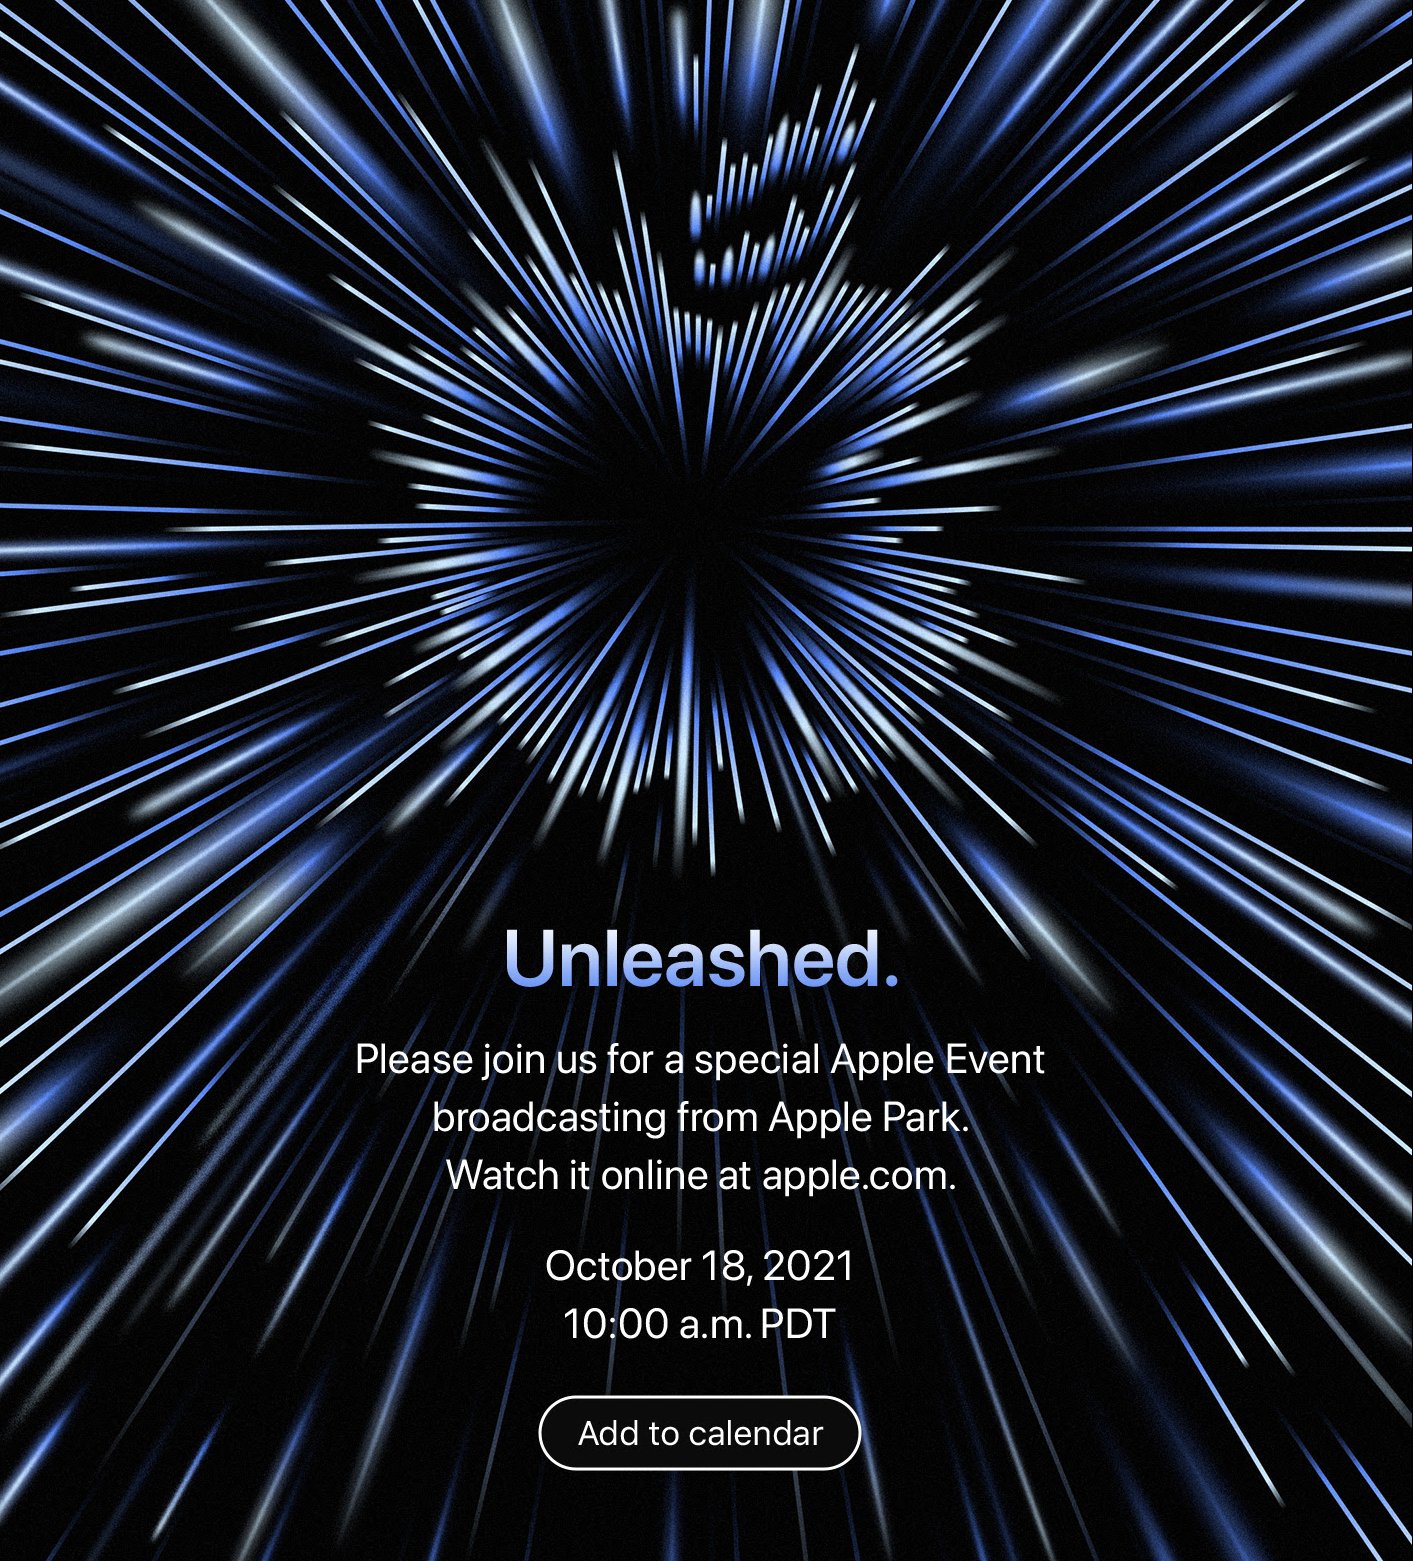 Preview of Apple’s October 18 “Unleashed” Event